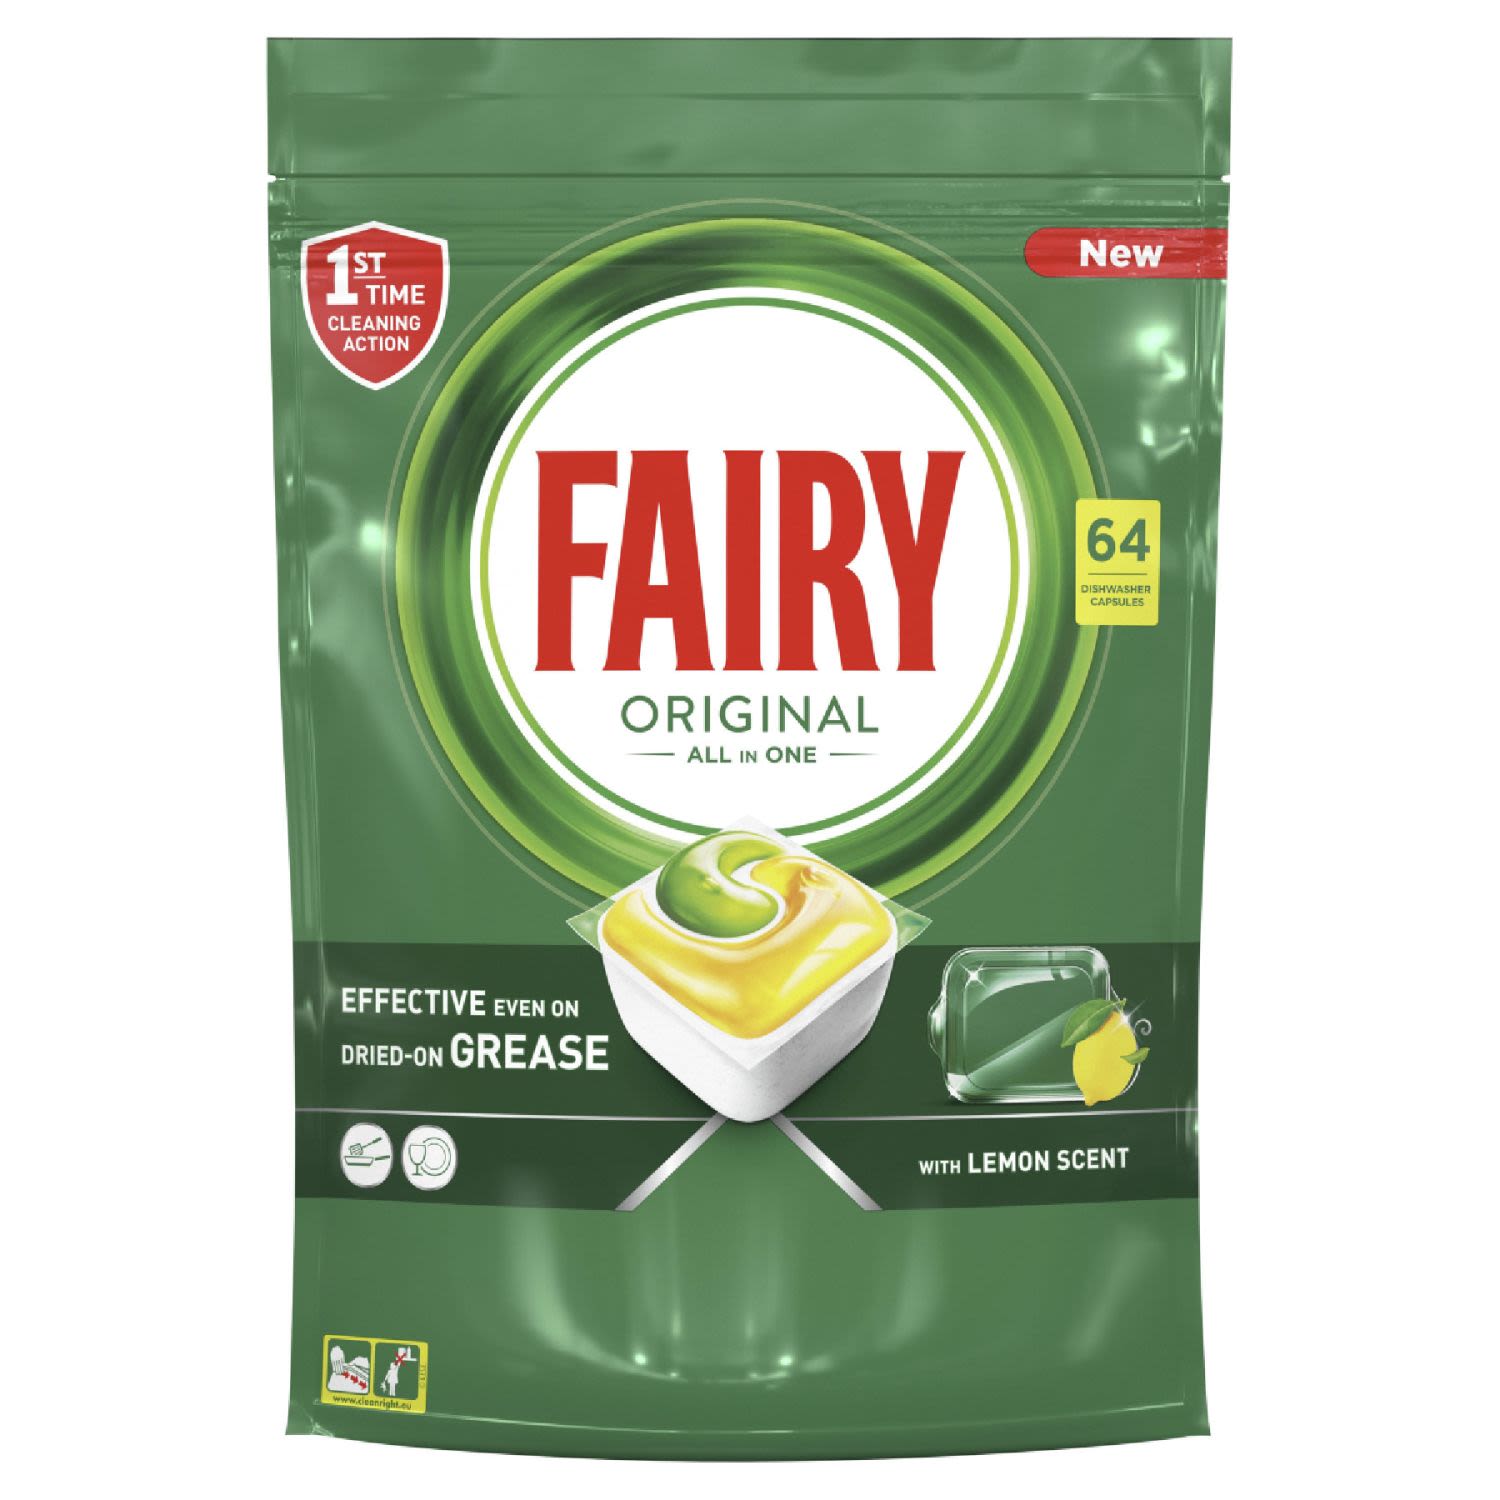 Fairy Original All in One Lemon Scented Automatic Dishwasher Tablets, 64 Each